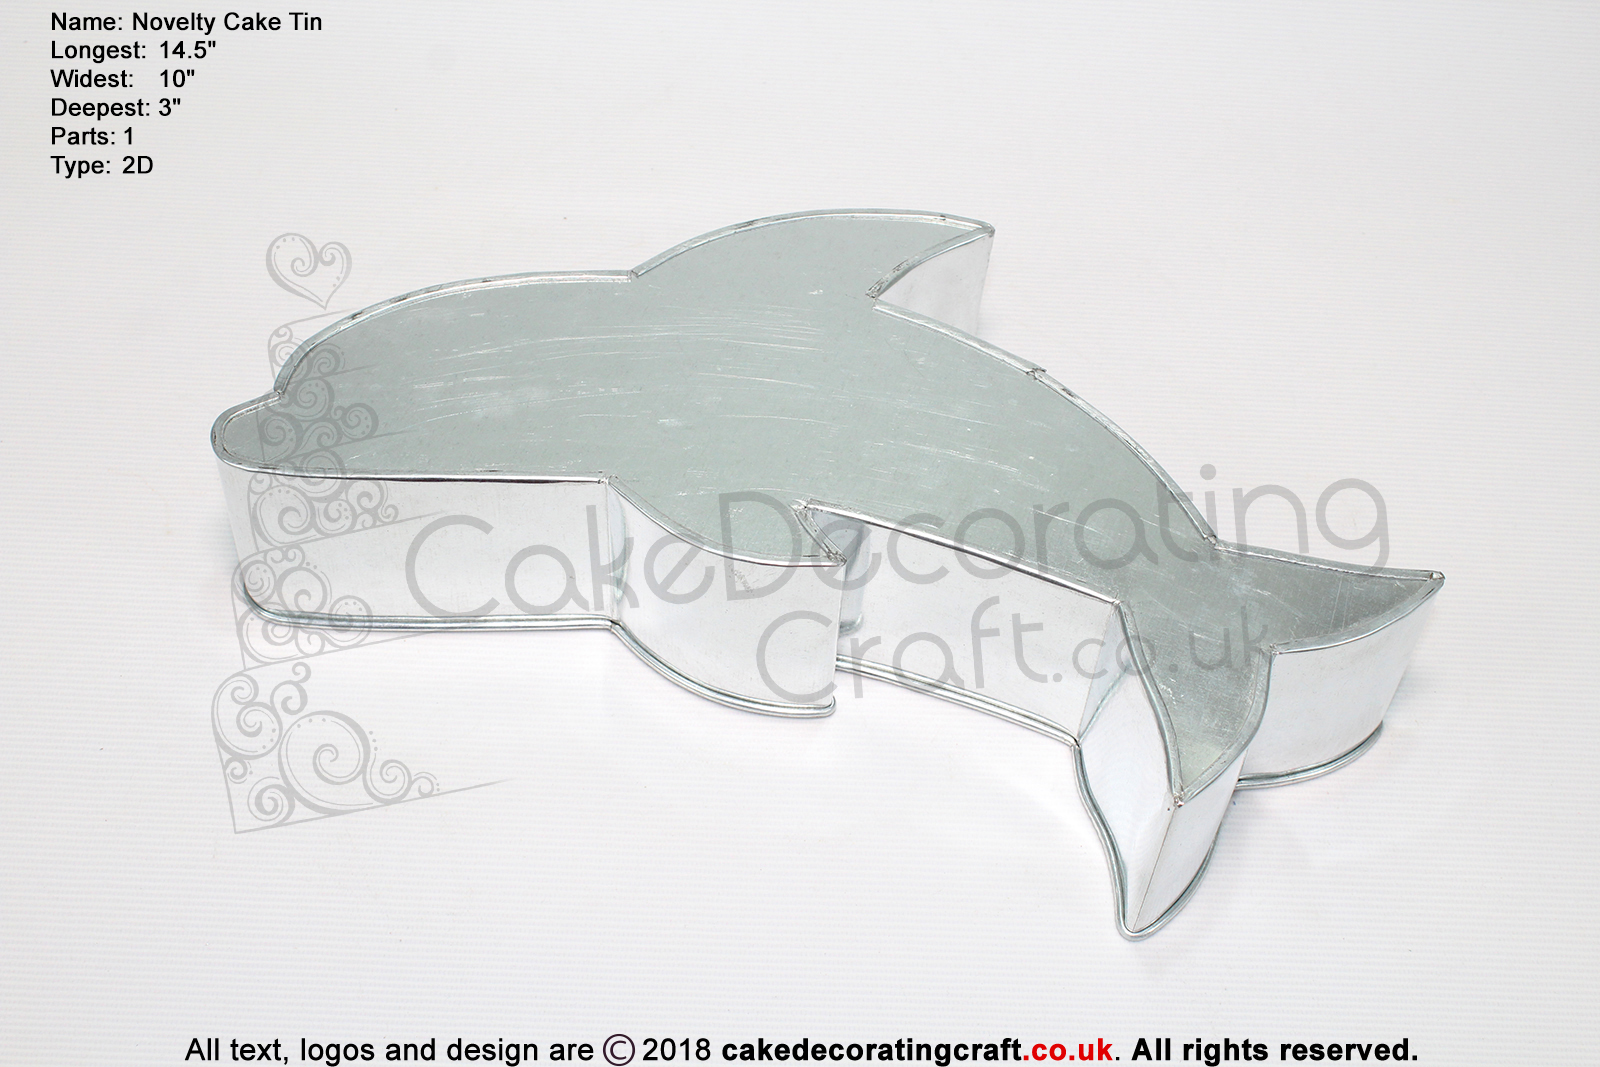 Dolphin Flying | Novelty Shape | Cake Baking Tins and Pans | 3" Deep